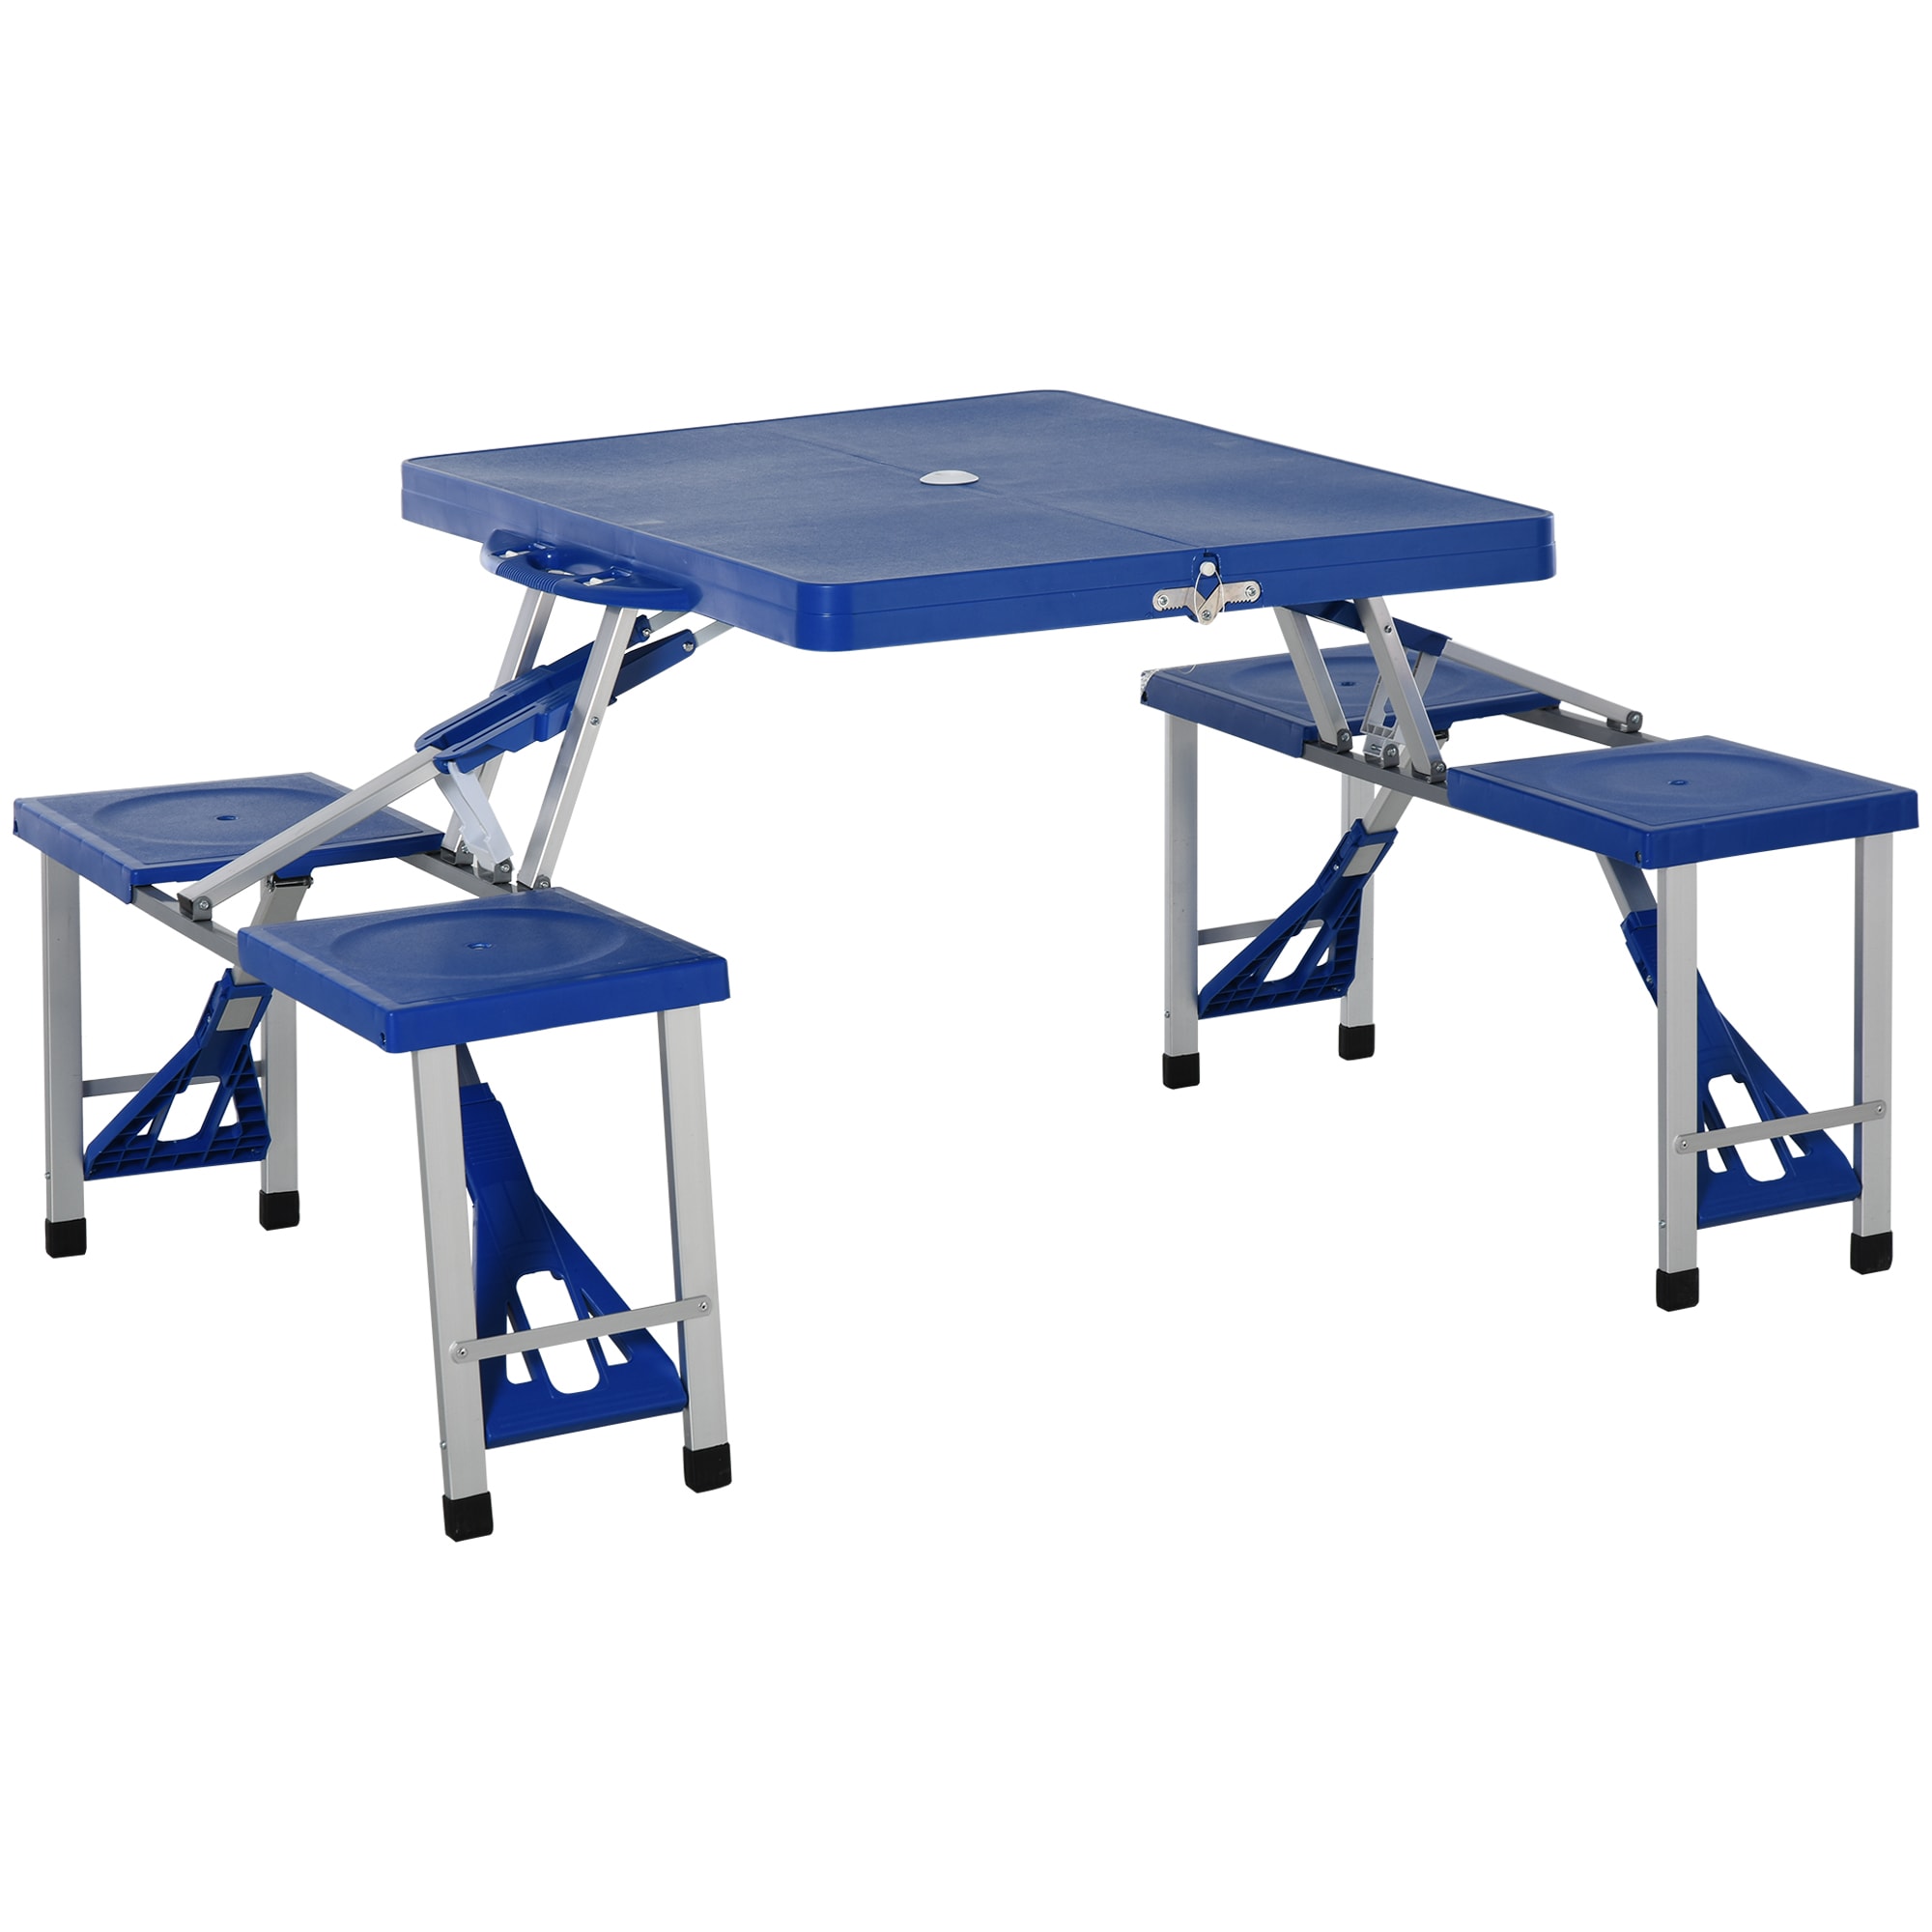 Aluminum Folding Camping Picnic Table With 2 Bench Chair Seats Portable Set 